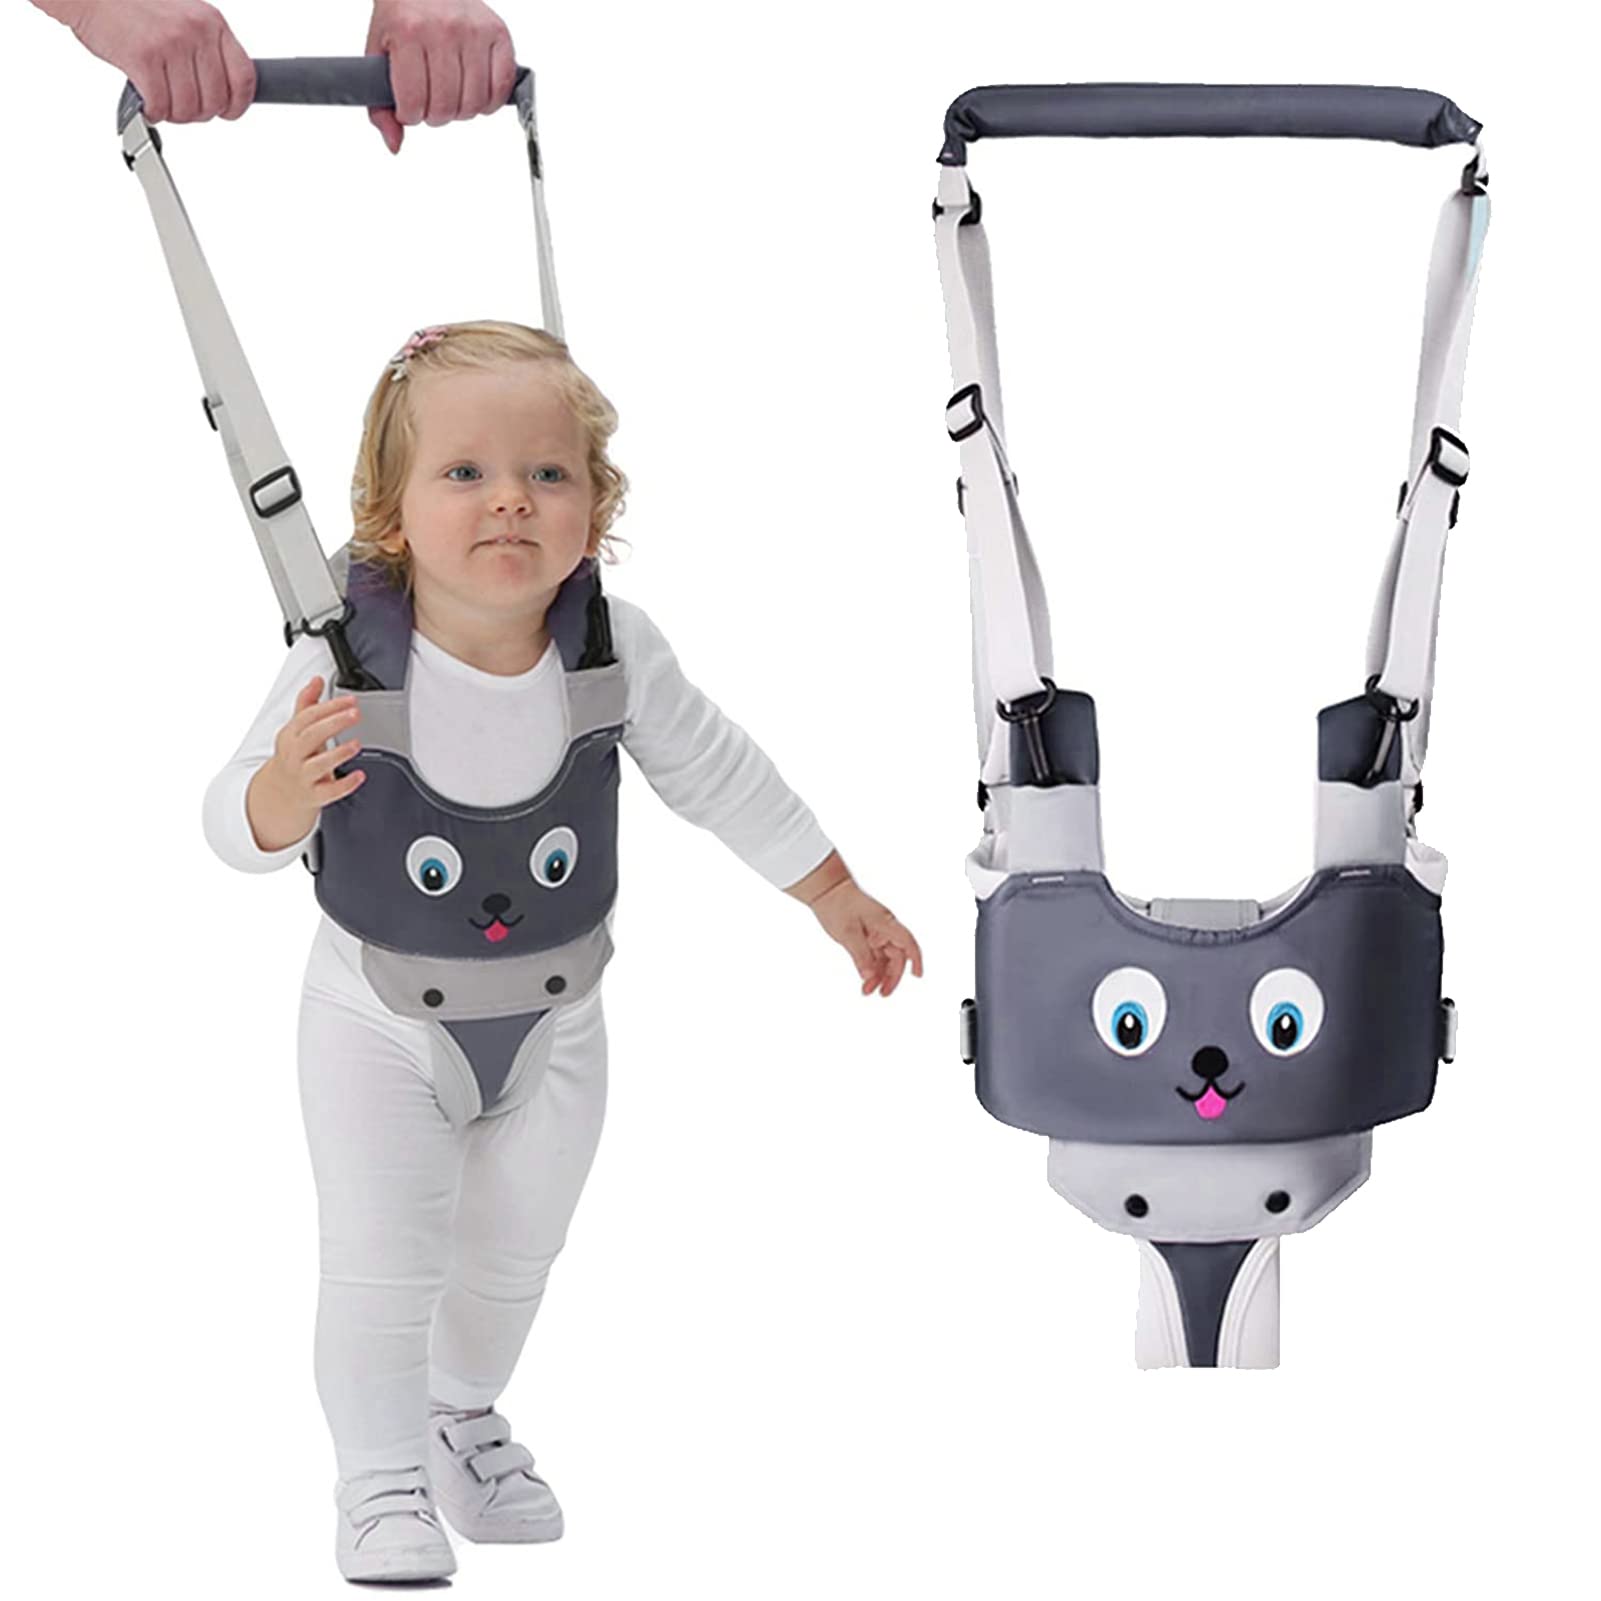 IULONEE Baby Walking Harness Handle Adjustable Toddler Walking Assistant Child Hand Held Standing Up and Walking Learning Helper Infant Walking Belt Reins Kids Safety Harness 7-24 Month (Grey)